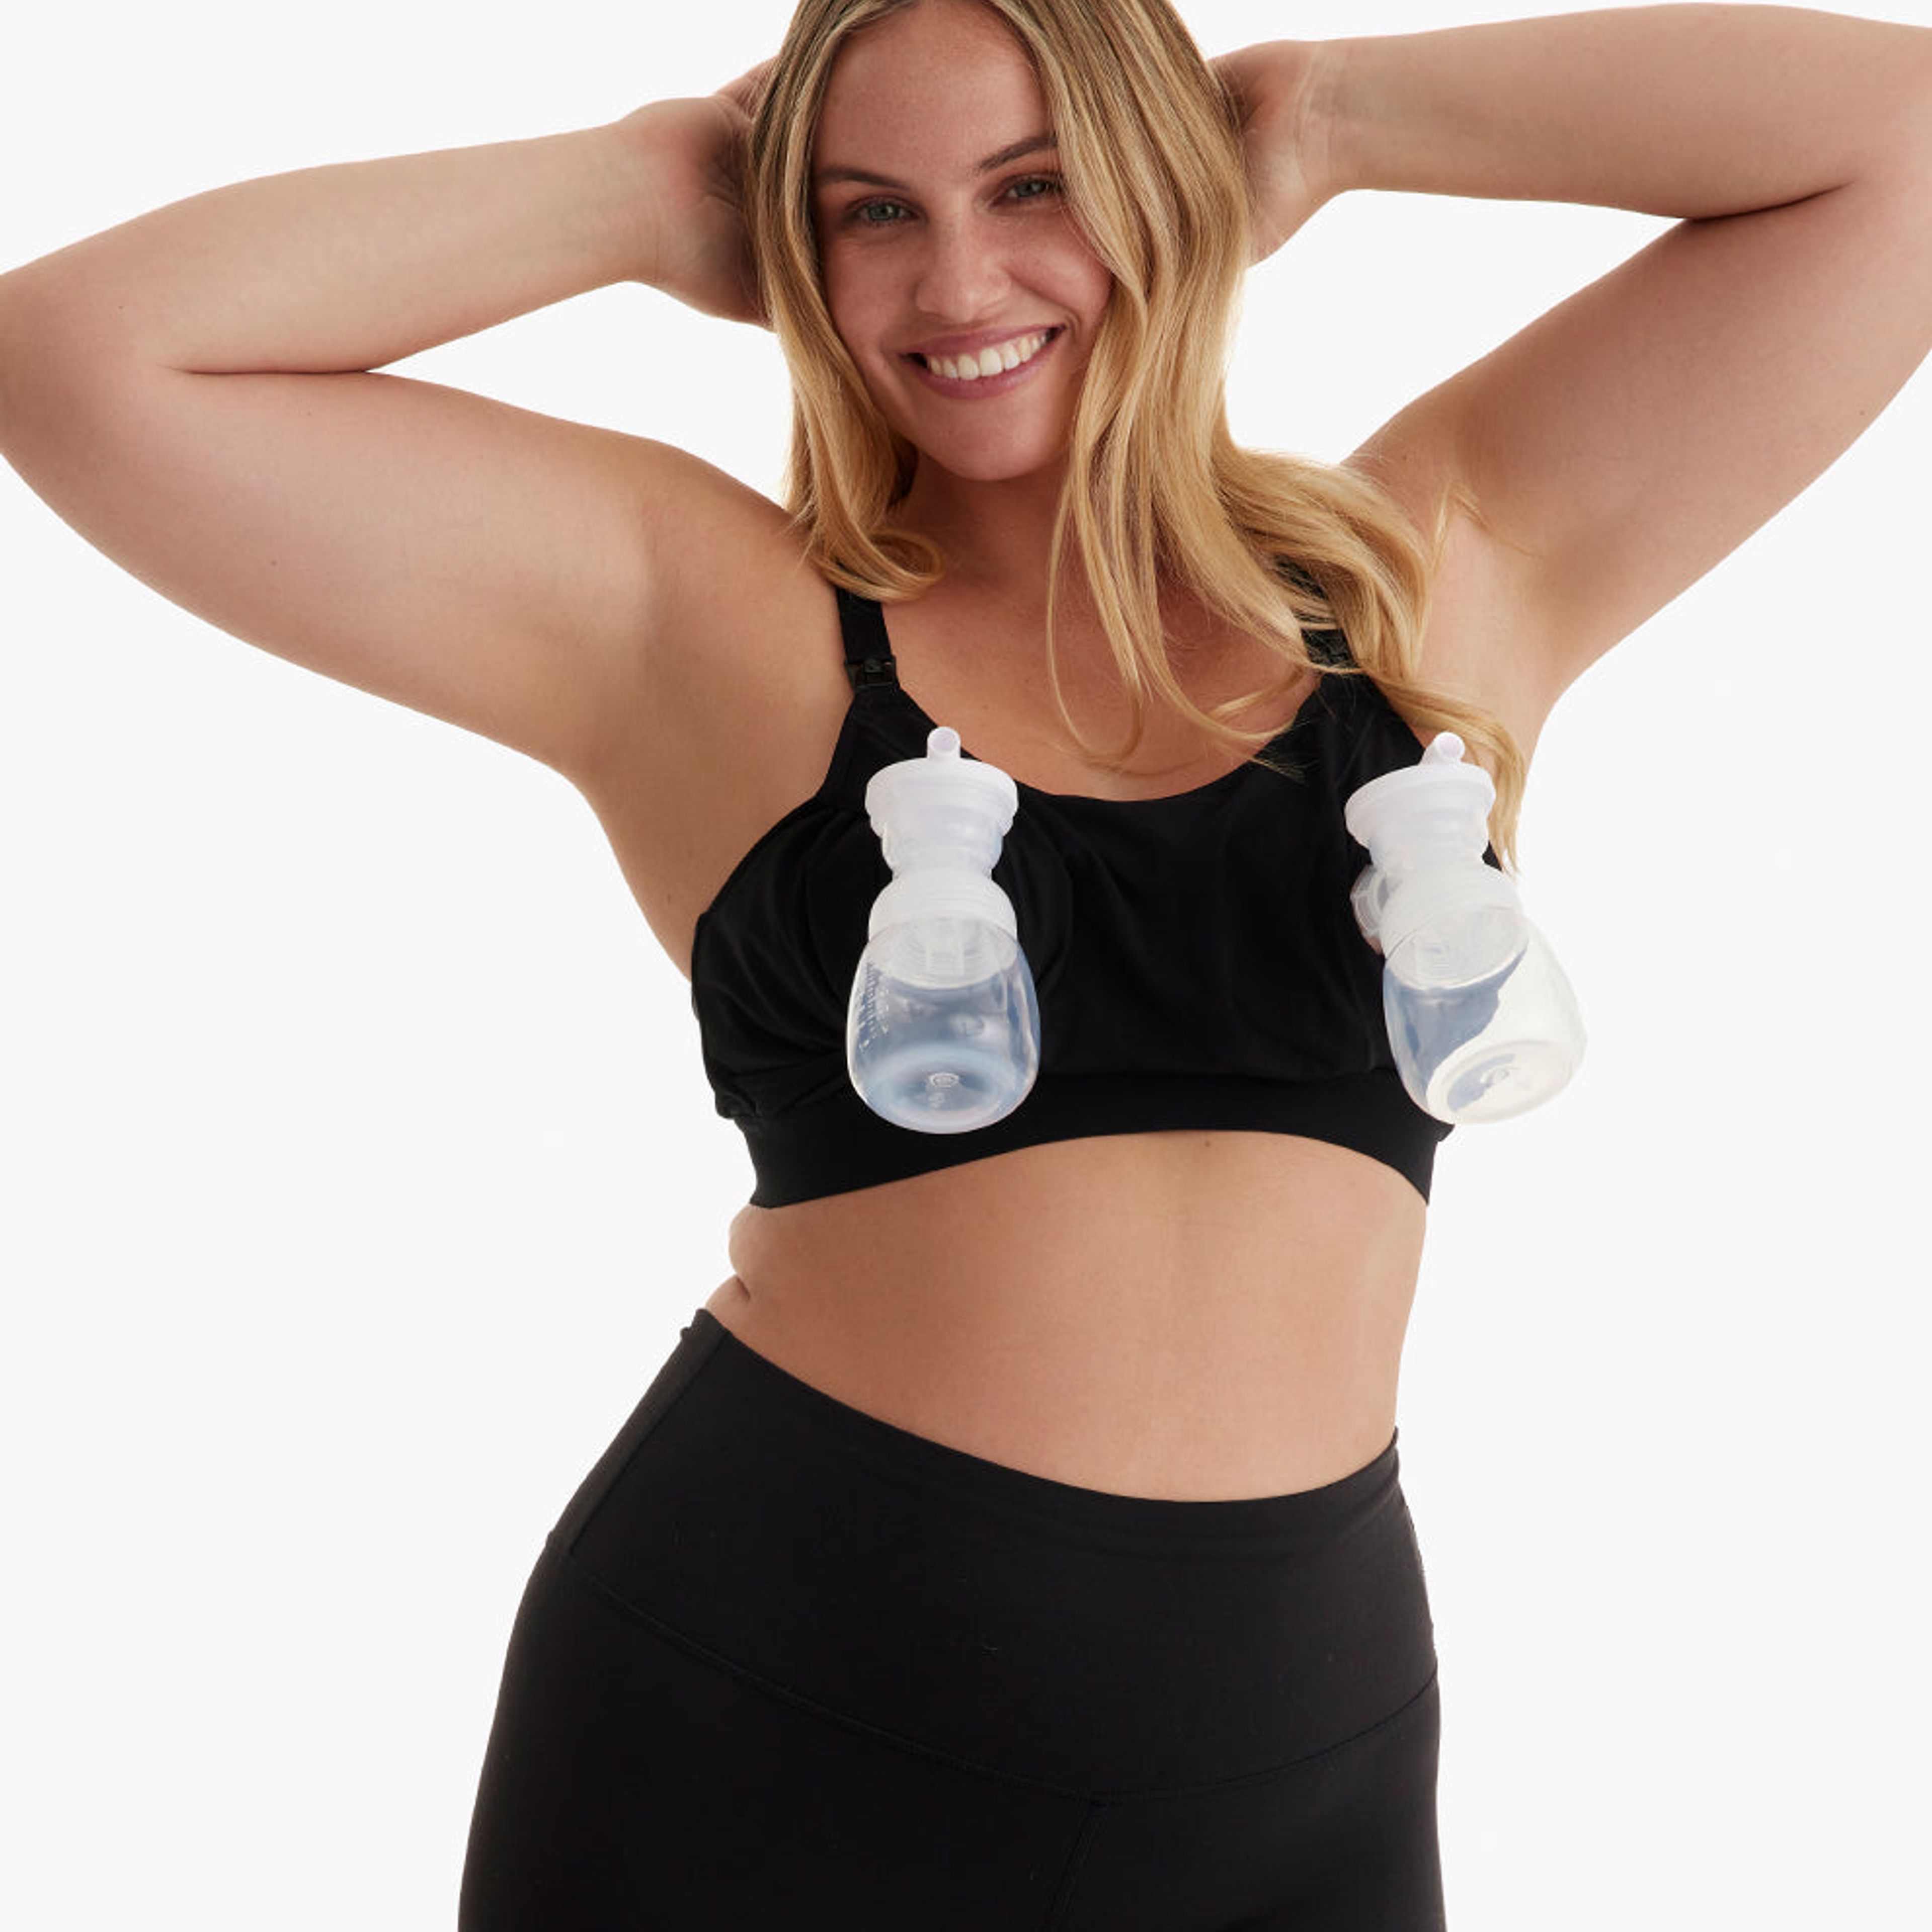  Momcozy Seamless Pumping Bra Hands Free, Comfort and